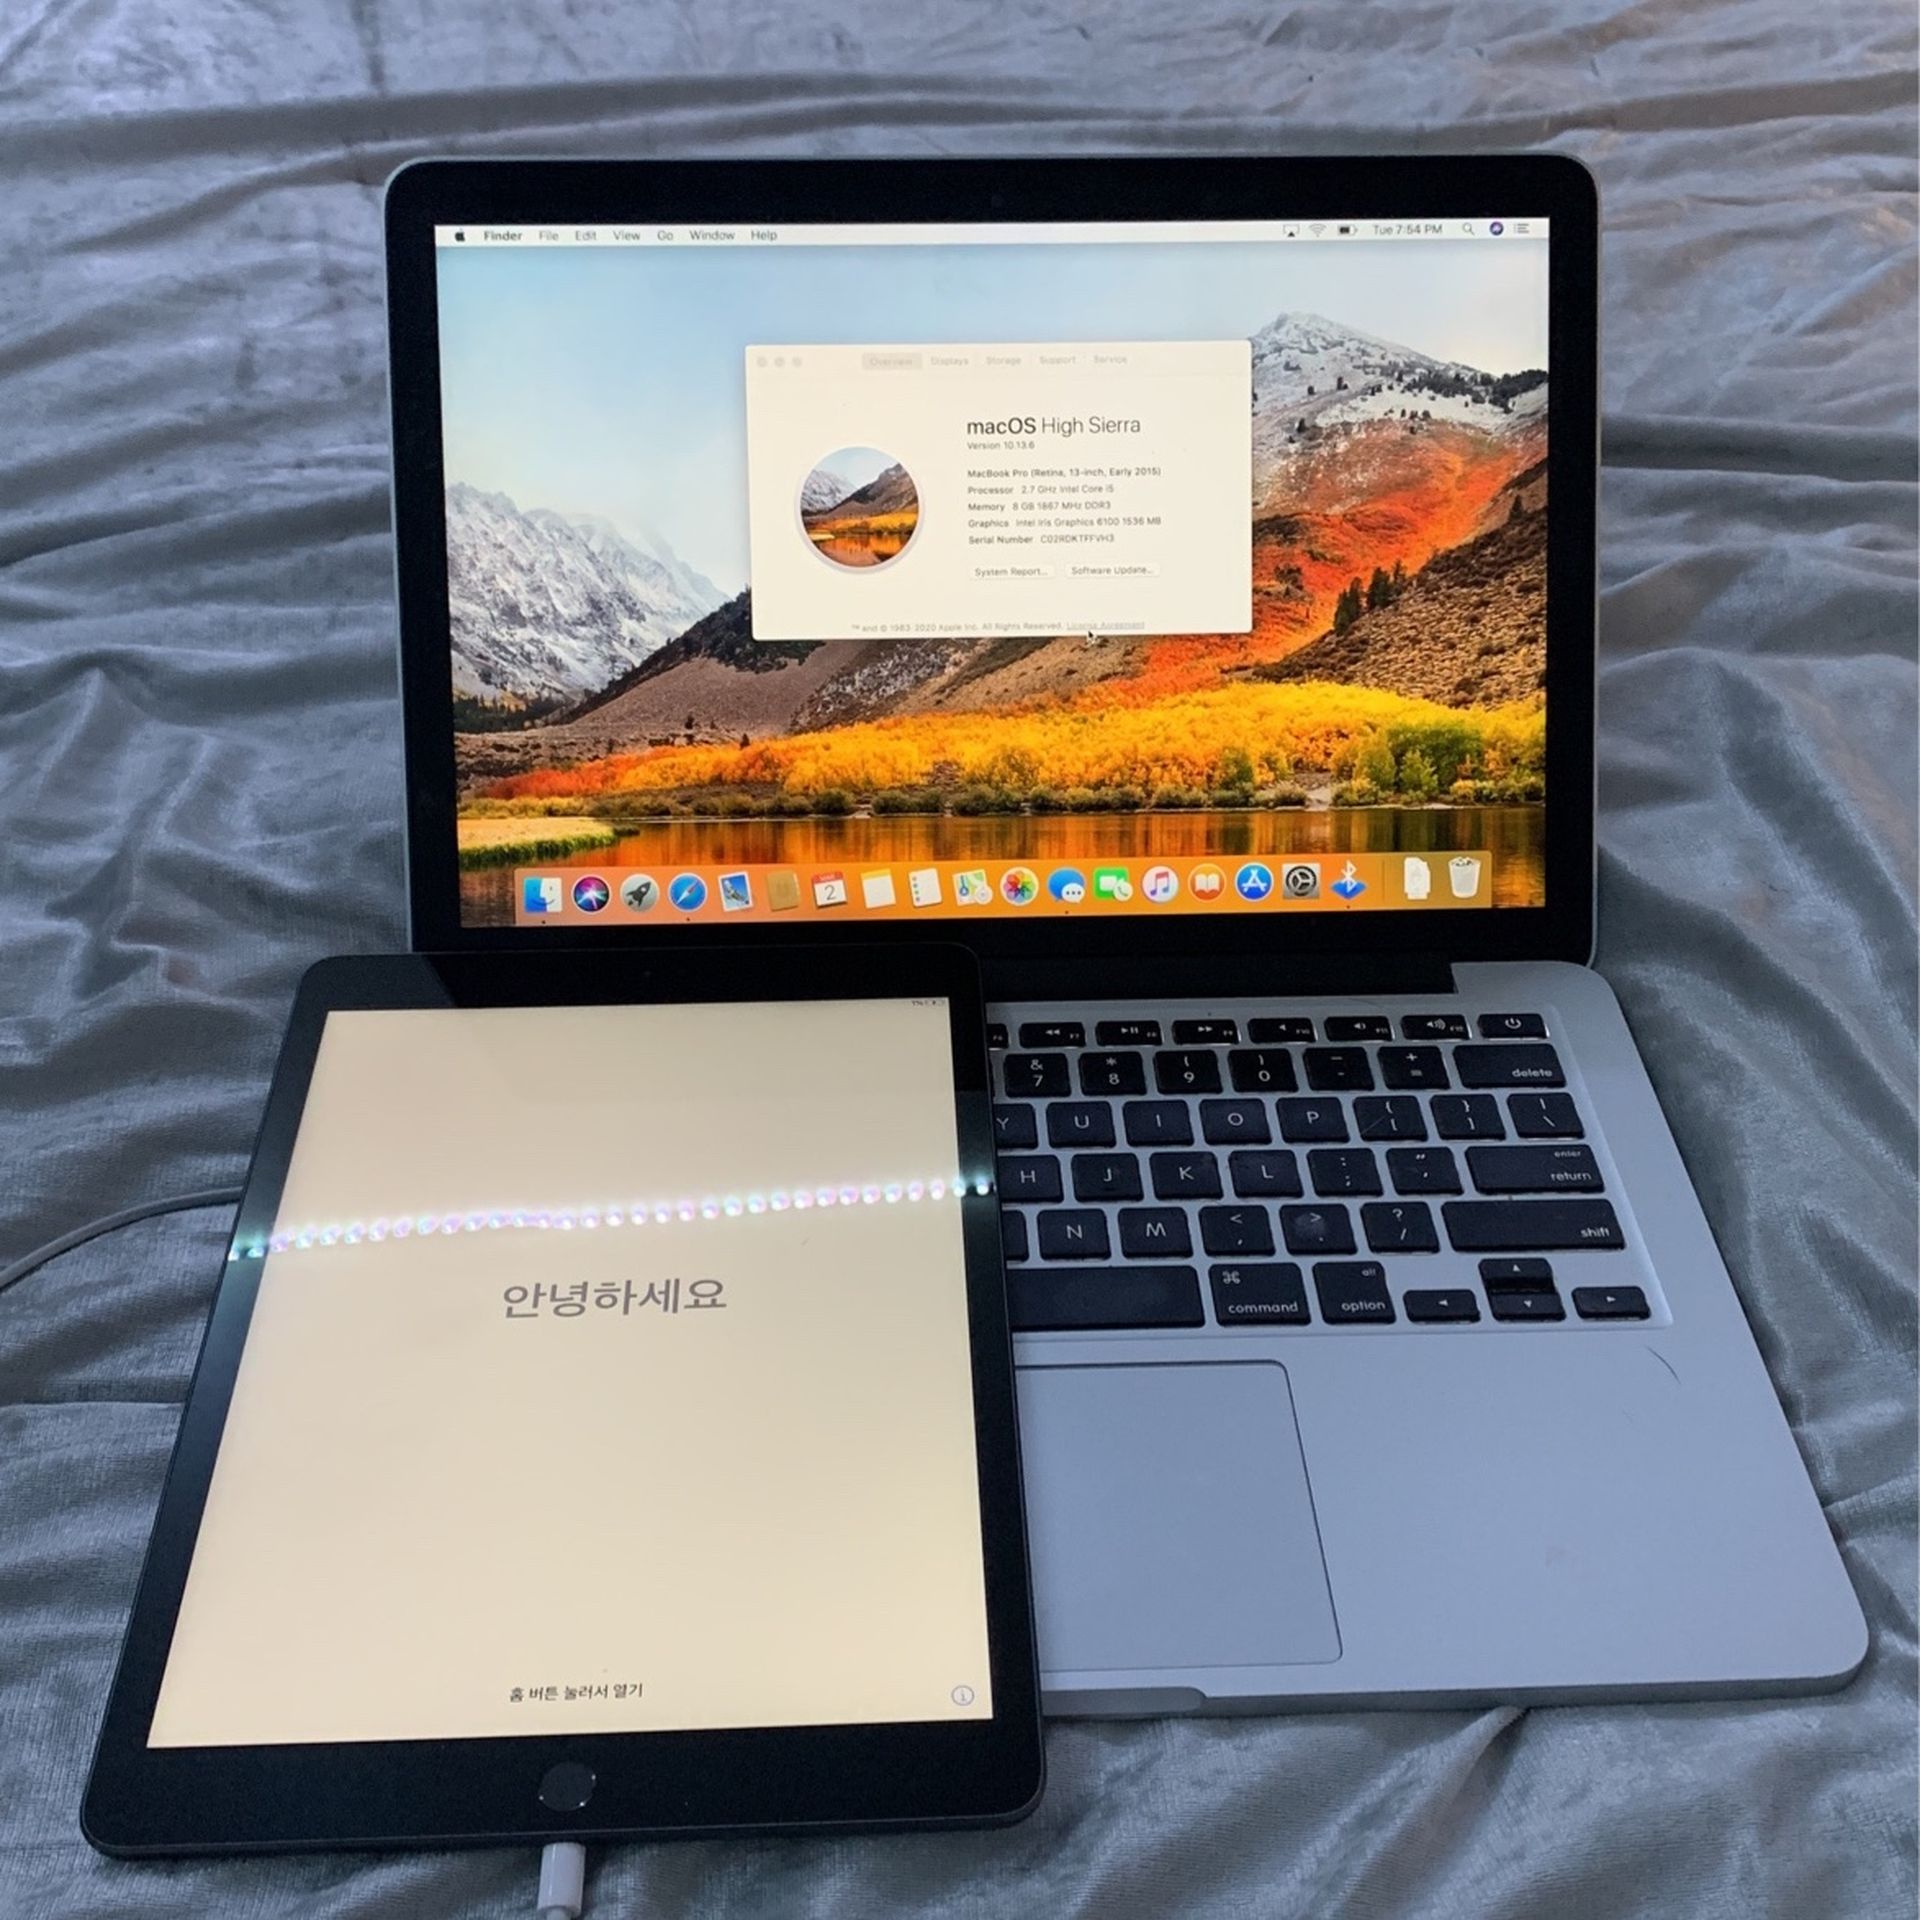 MacBook Is Still Available